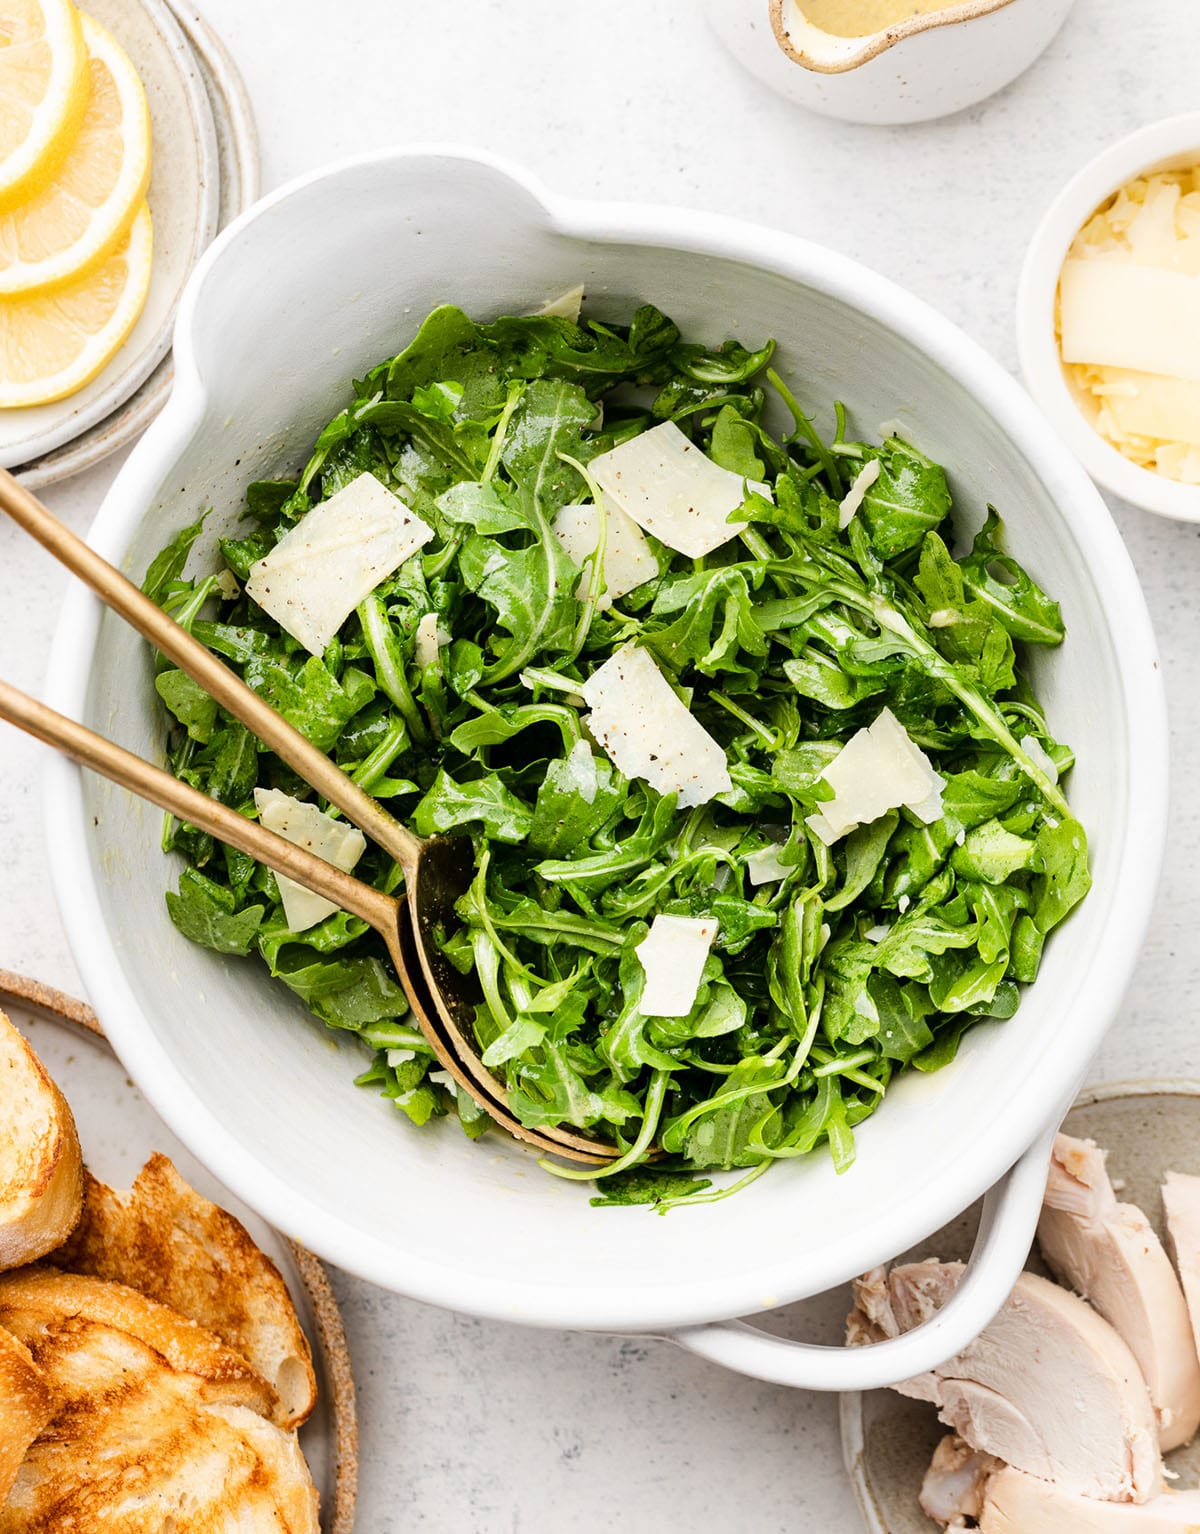 Arugula salad in a white bowl with bronze serving spoons.